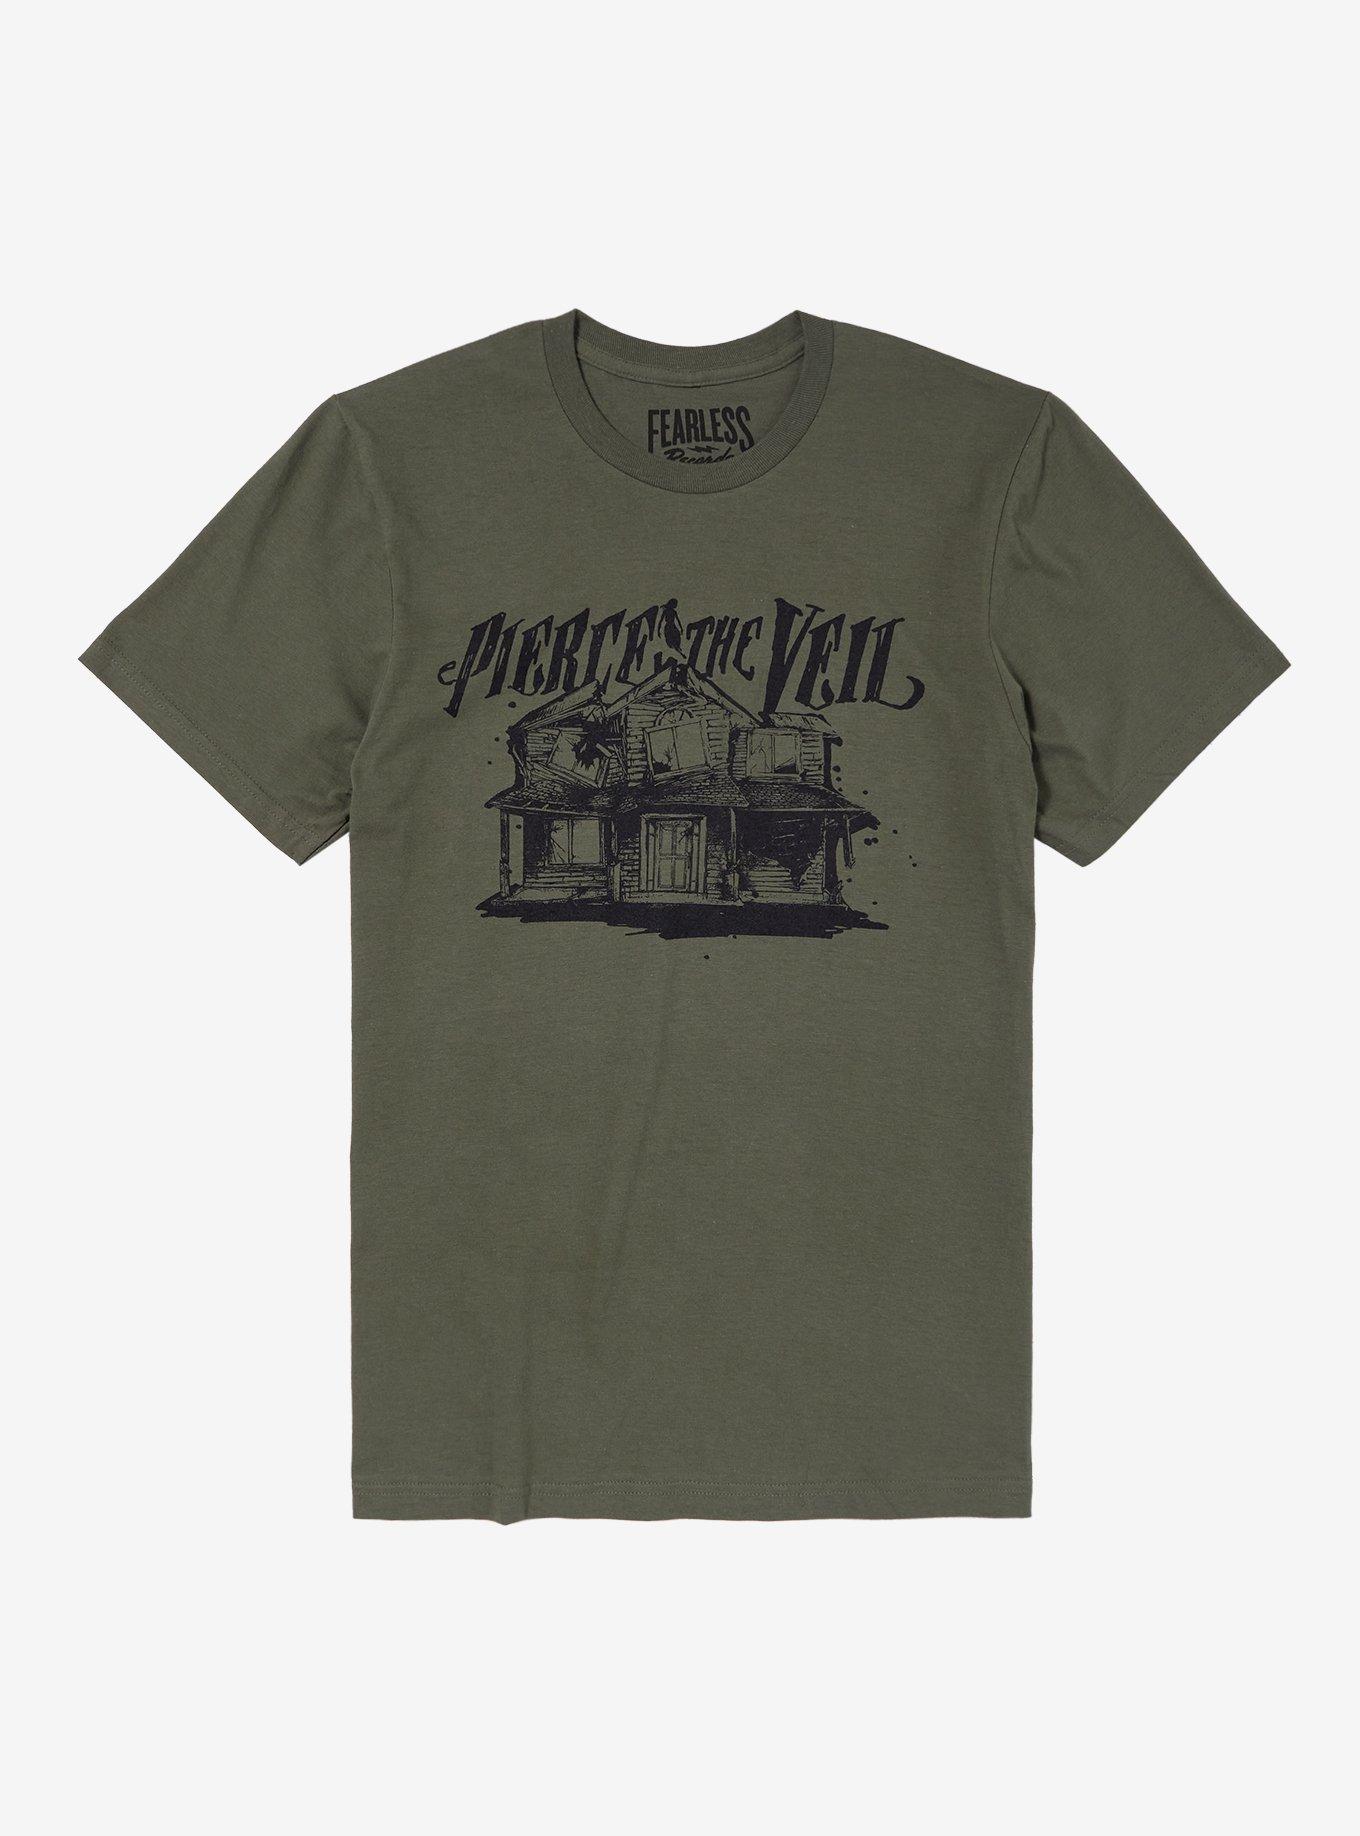 Pierce The Veil Collide With The Sky House Boyfriend Fit Girls T-Shirt, MILITARY GREEN, hi-res